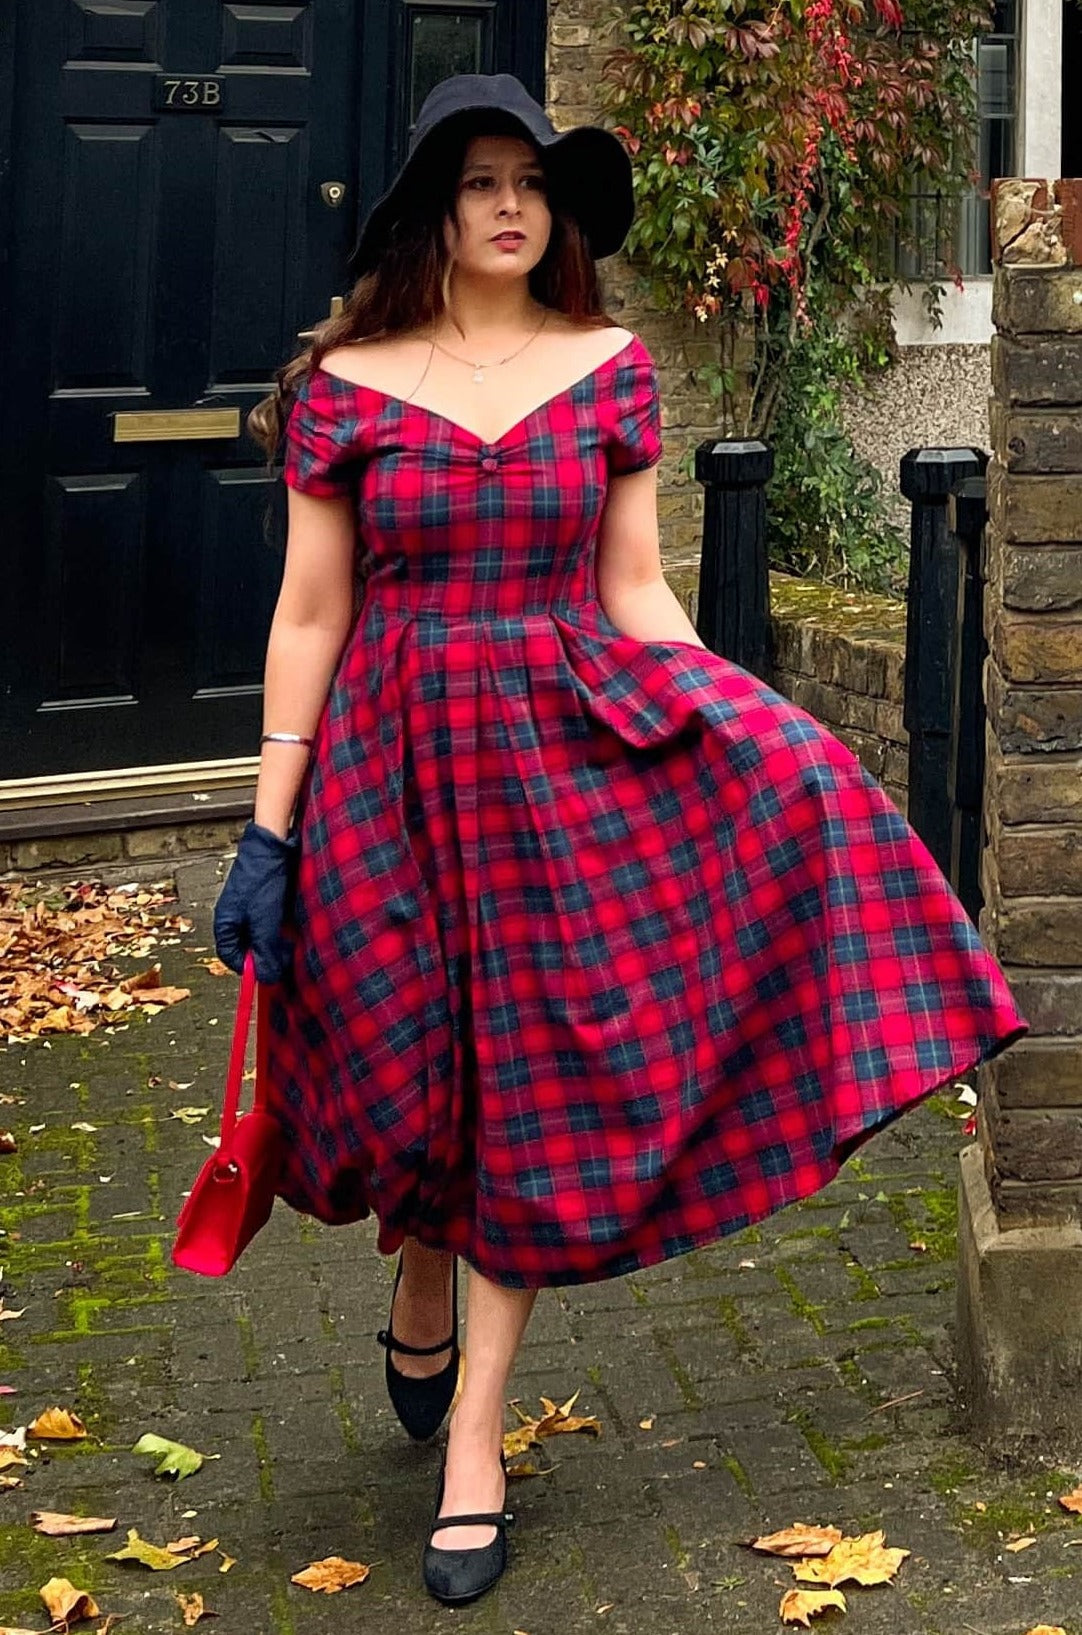 thedreamylife wearing winter Vintage Off Shoulder Check Dress in Red Blue